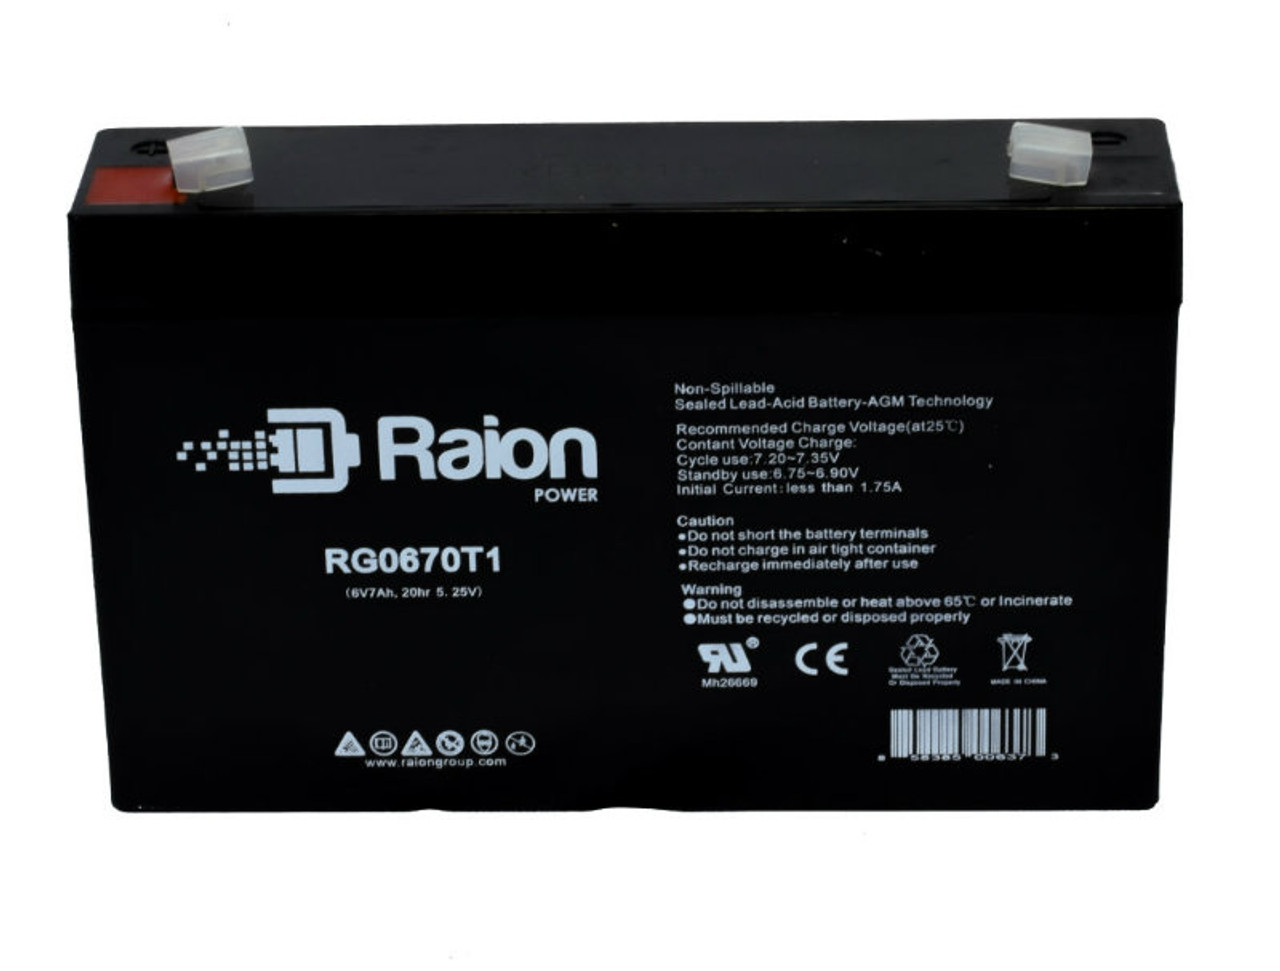 Raion Power RG0670T1 Replacement Battery Cartridge for Kid Motorz 0652 Kiddie Quad Blue